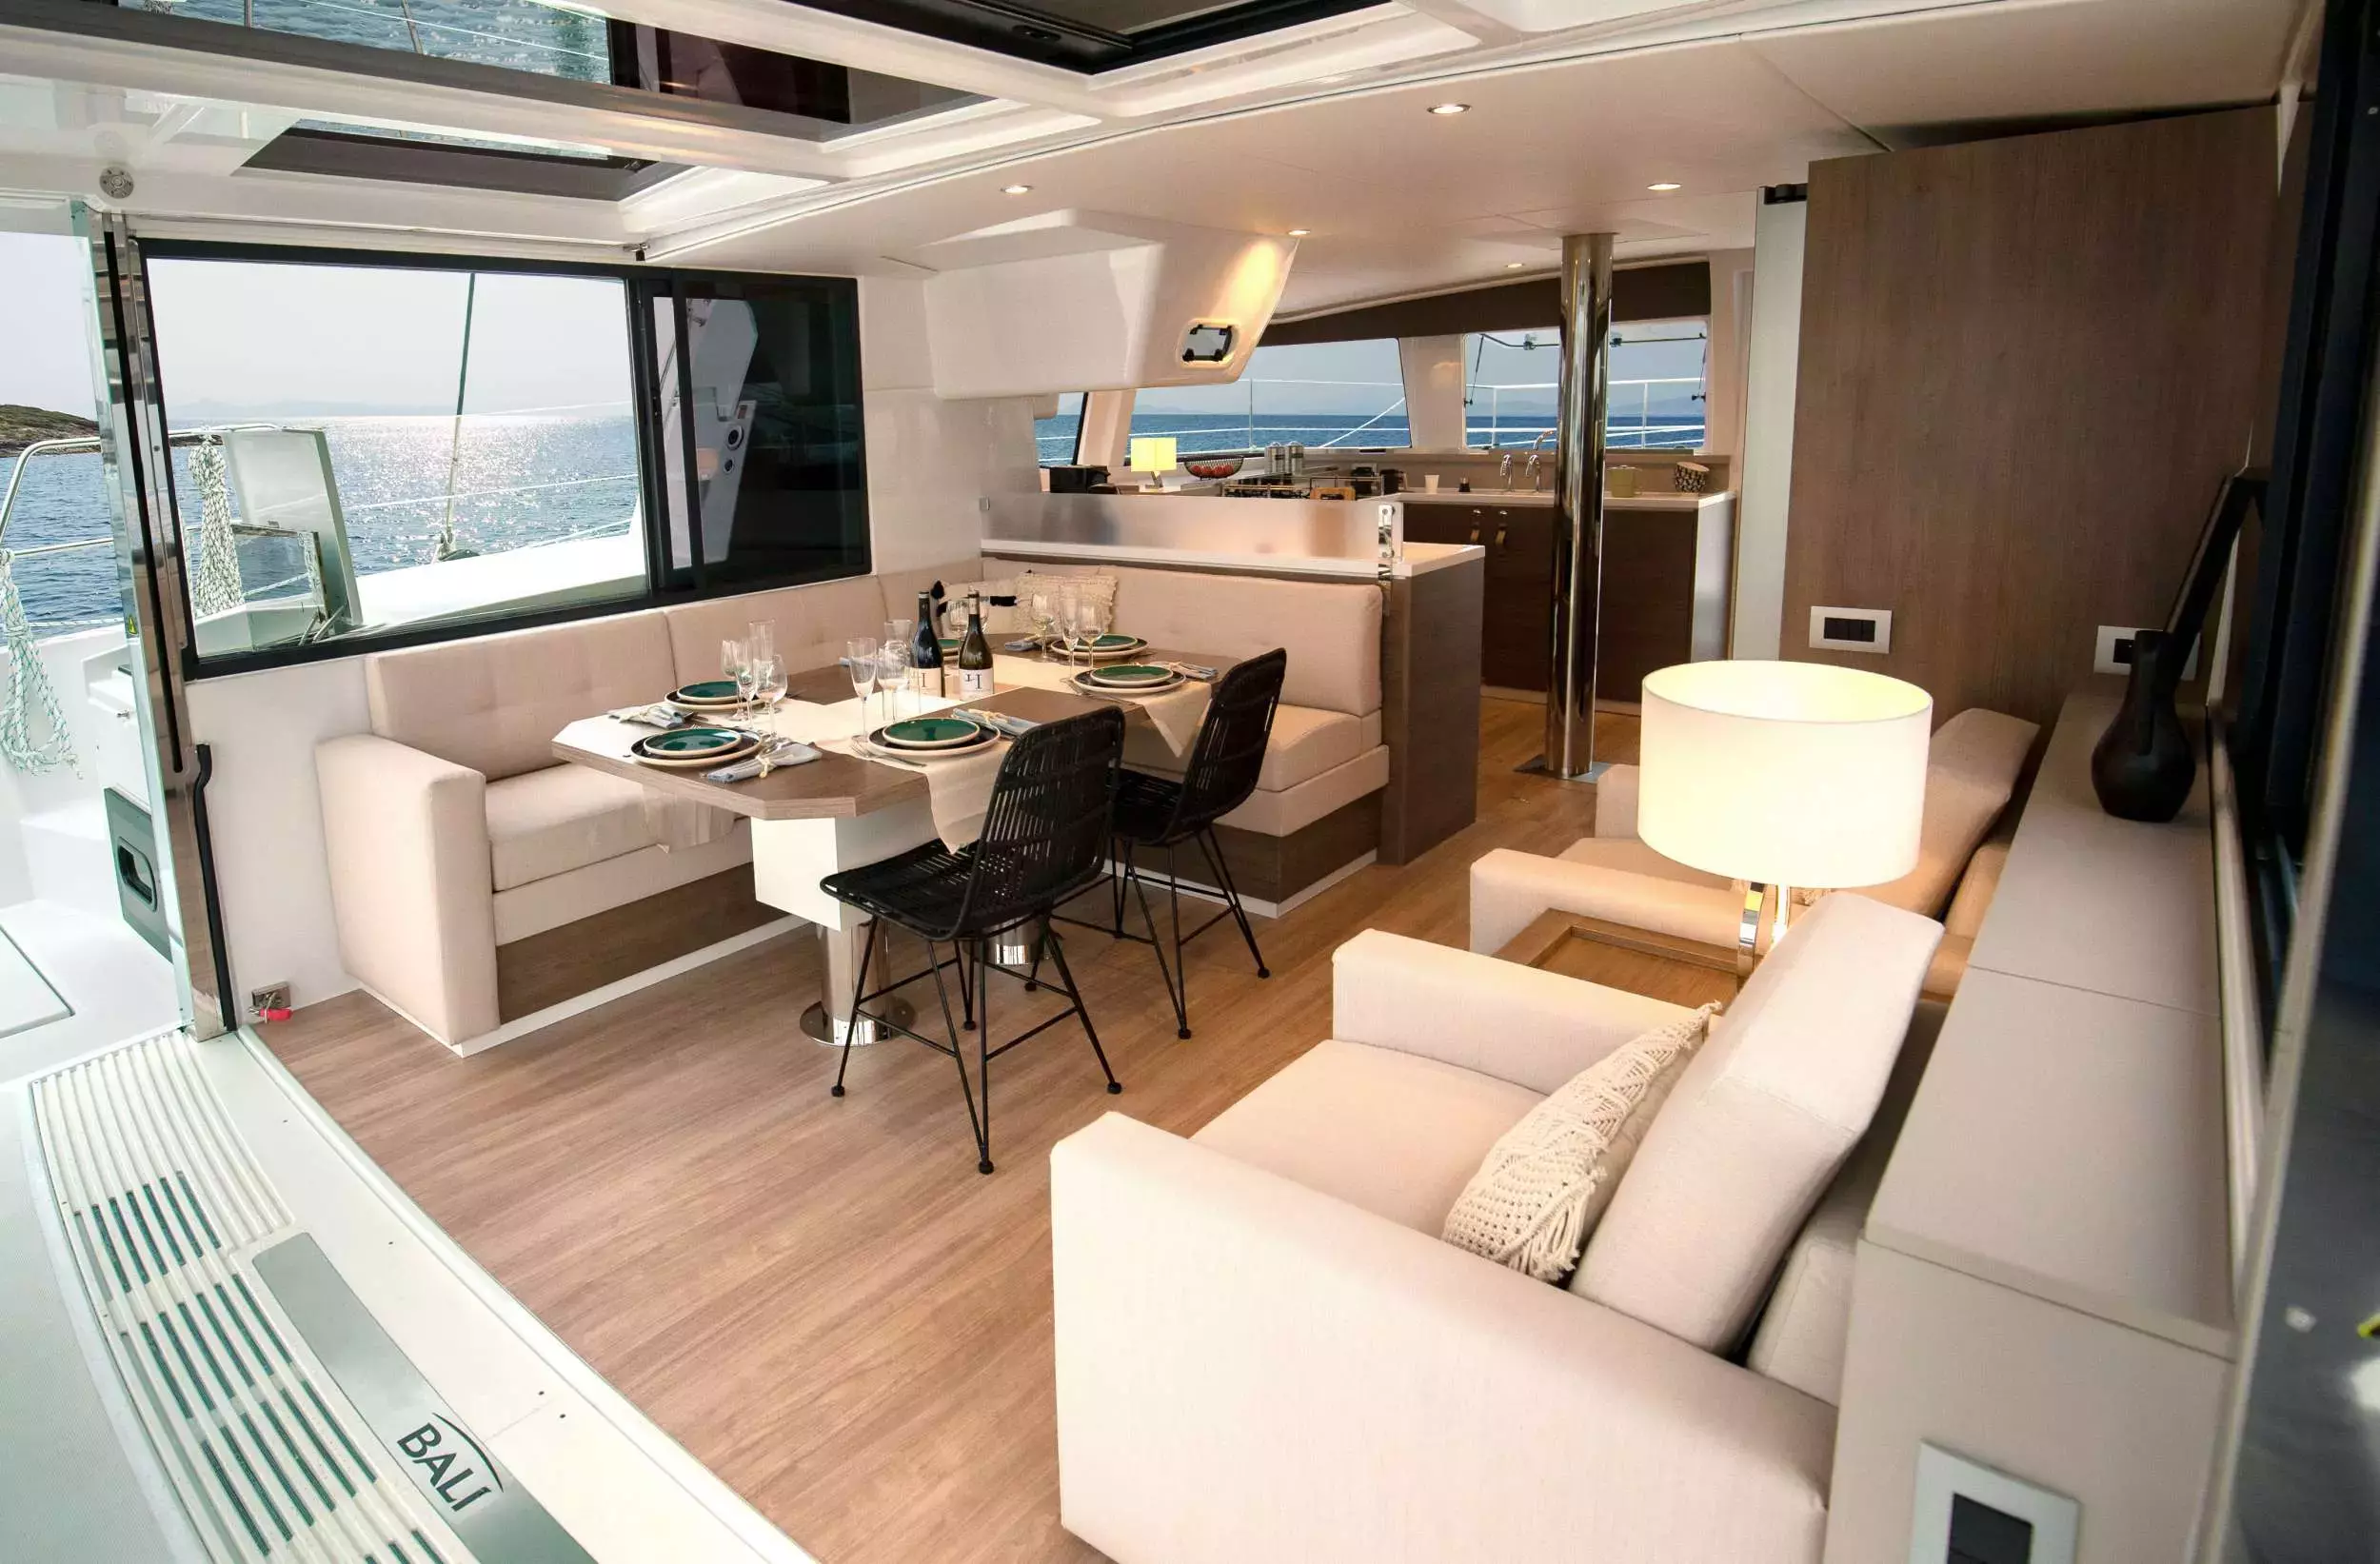 Knowker by Bali Catamarans - Special Offer for a private Sailing Catamaran Rental in Menorca with a crew